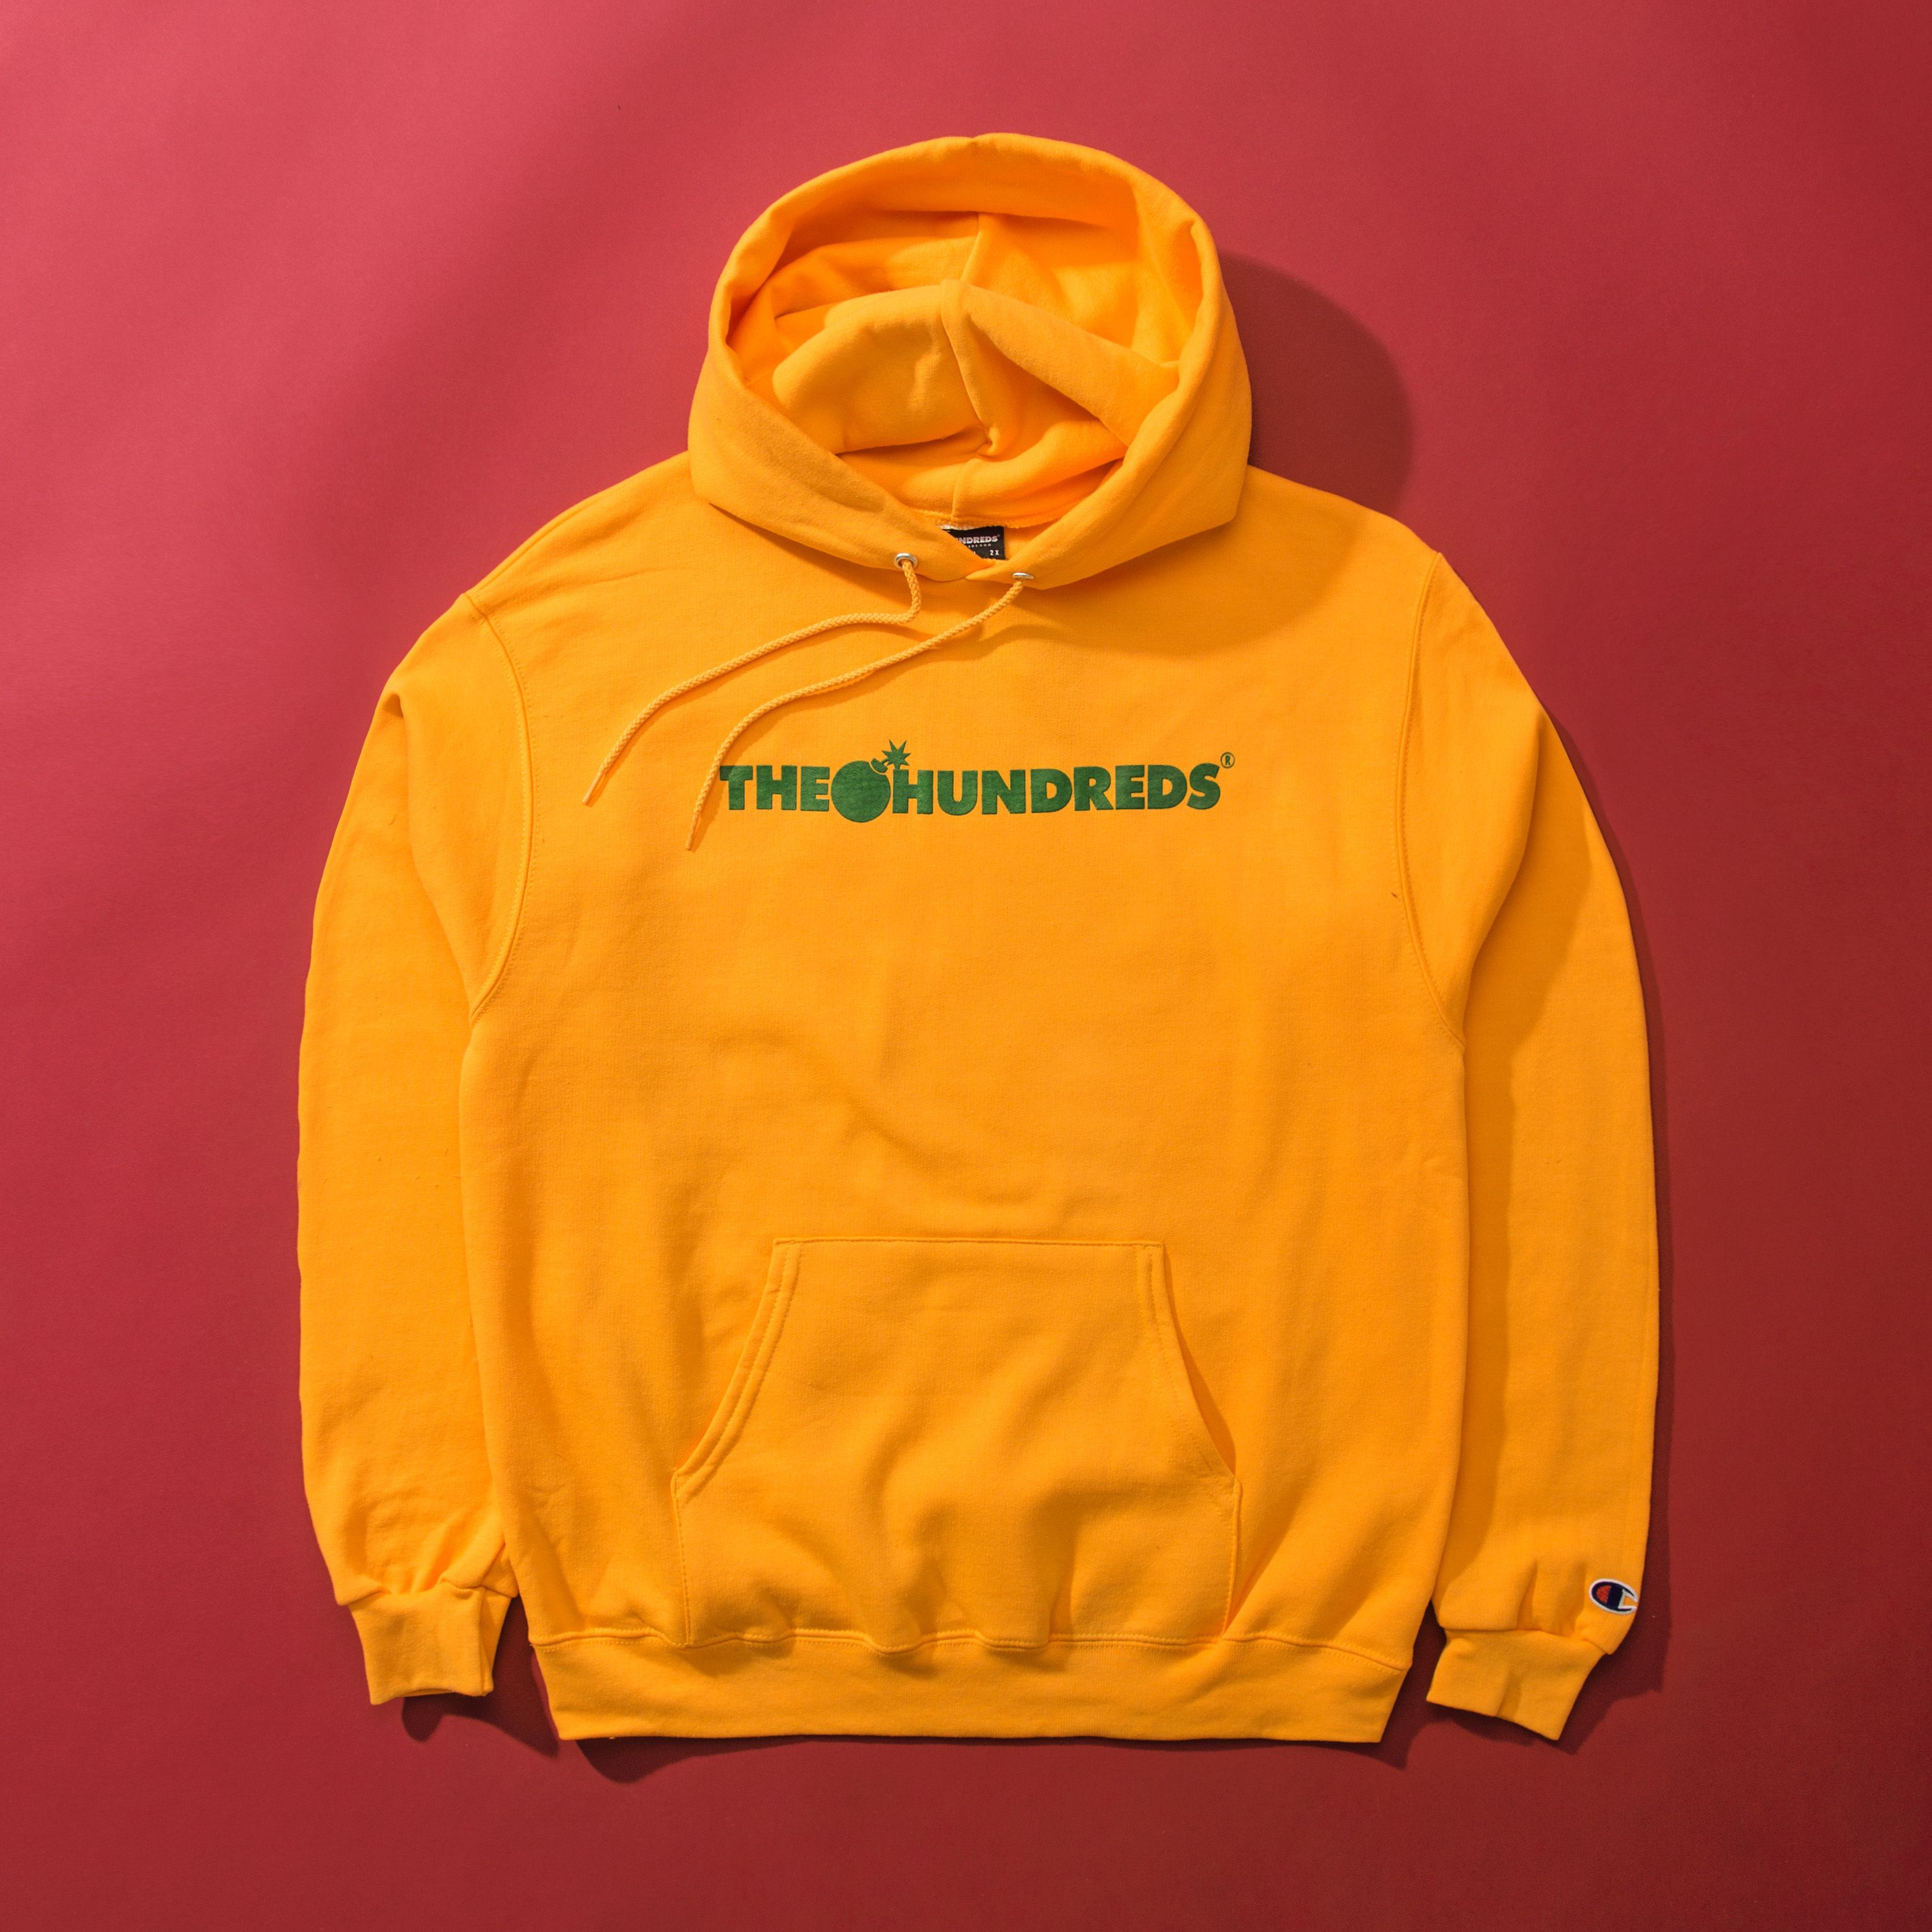 The Hundreds on Twitter: "The "Forever Bar" Champion hoodie will be available 10.4.18 https://t.co/jDZ840Jv8Z" Twitter